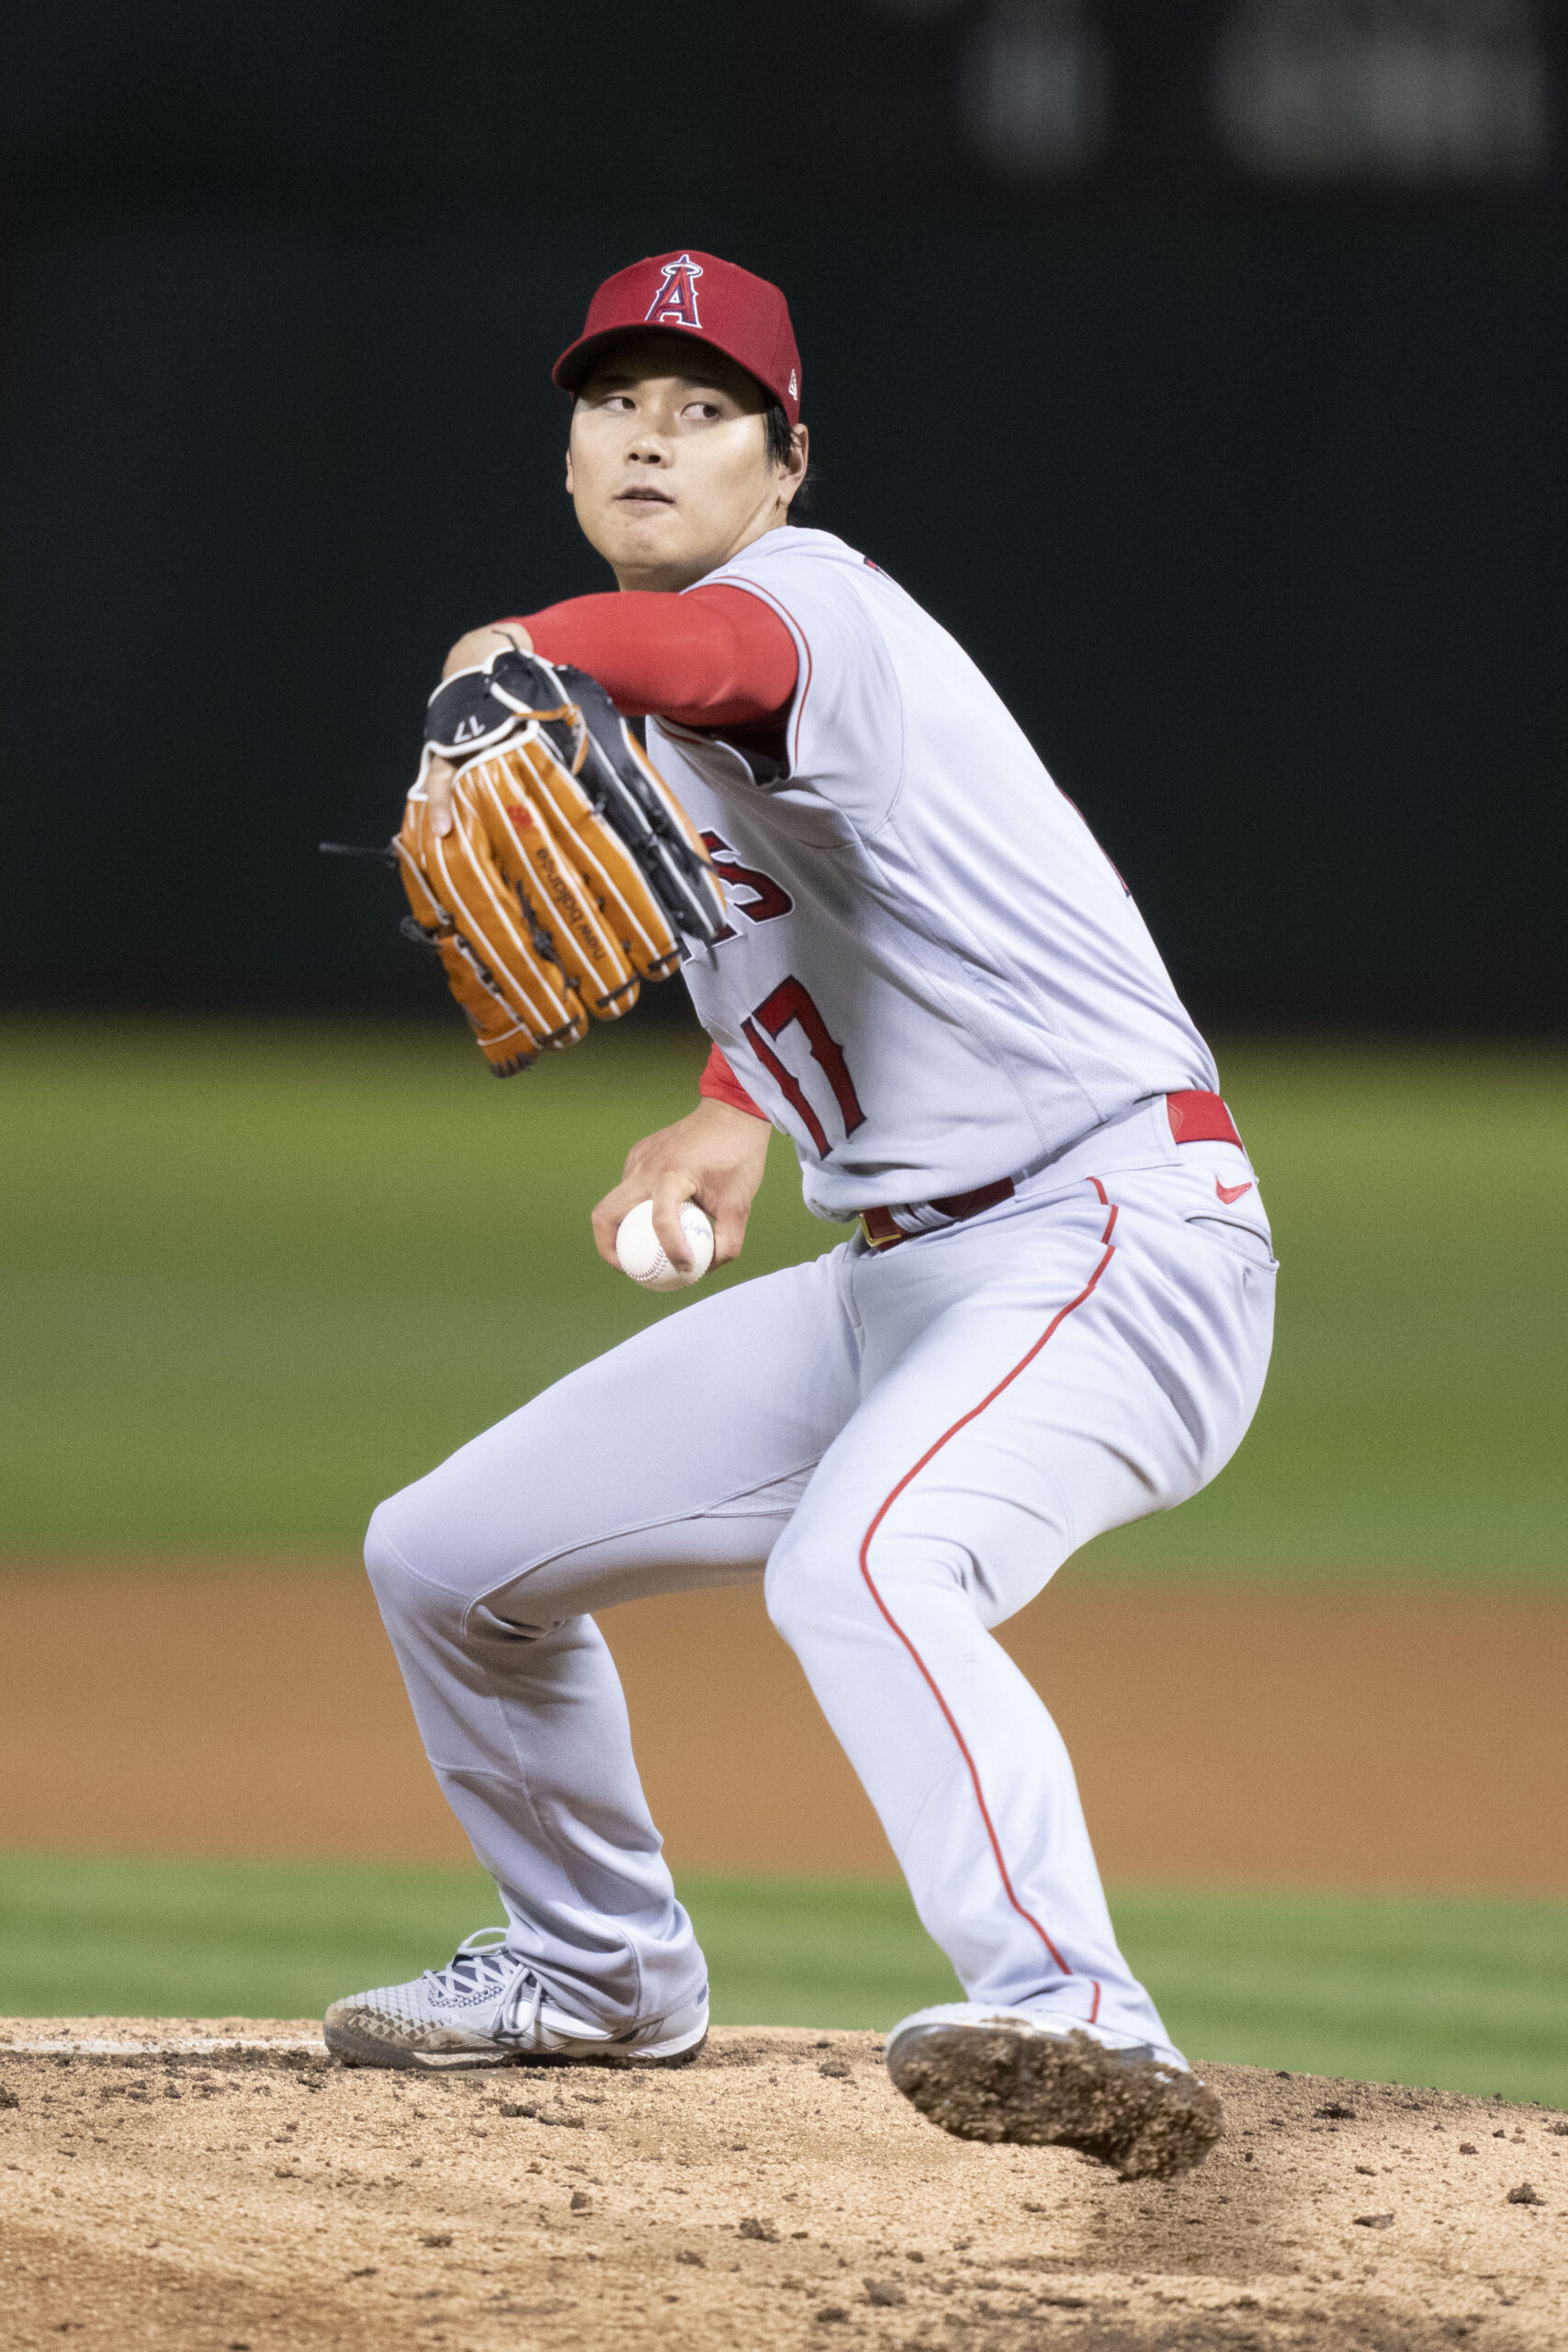 MLB free agent watch: Ohtani leads possible 2023-24 class